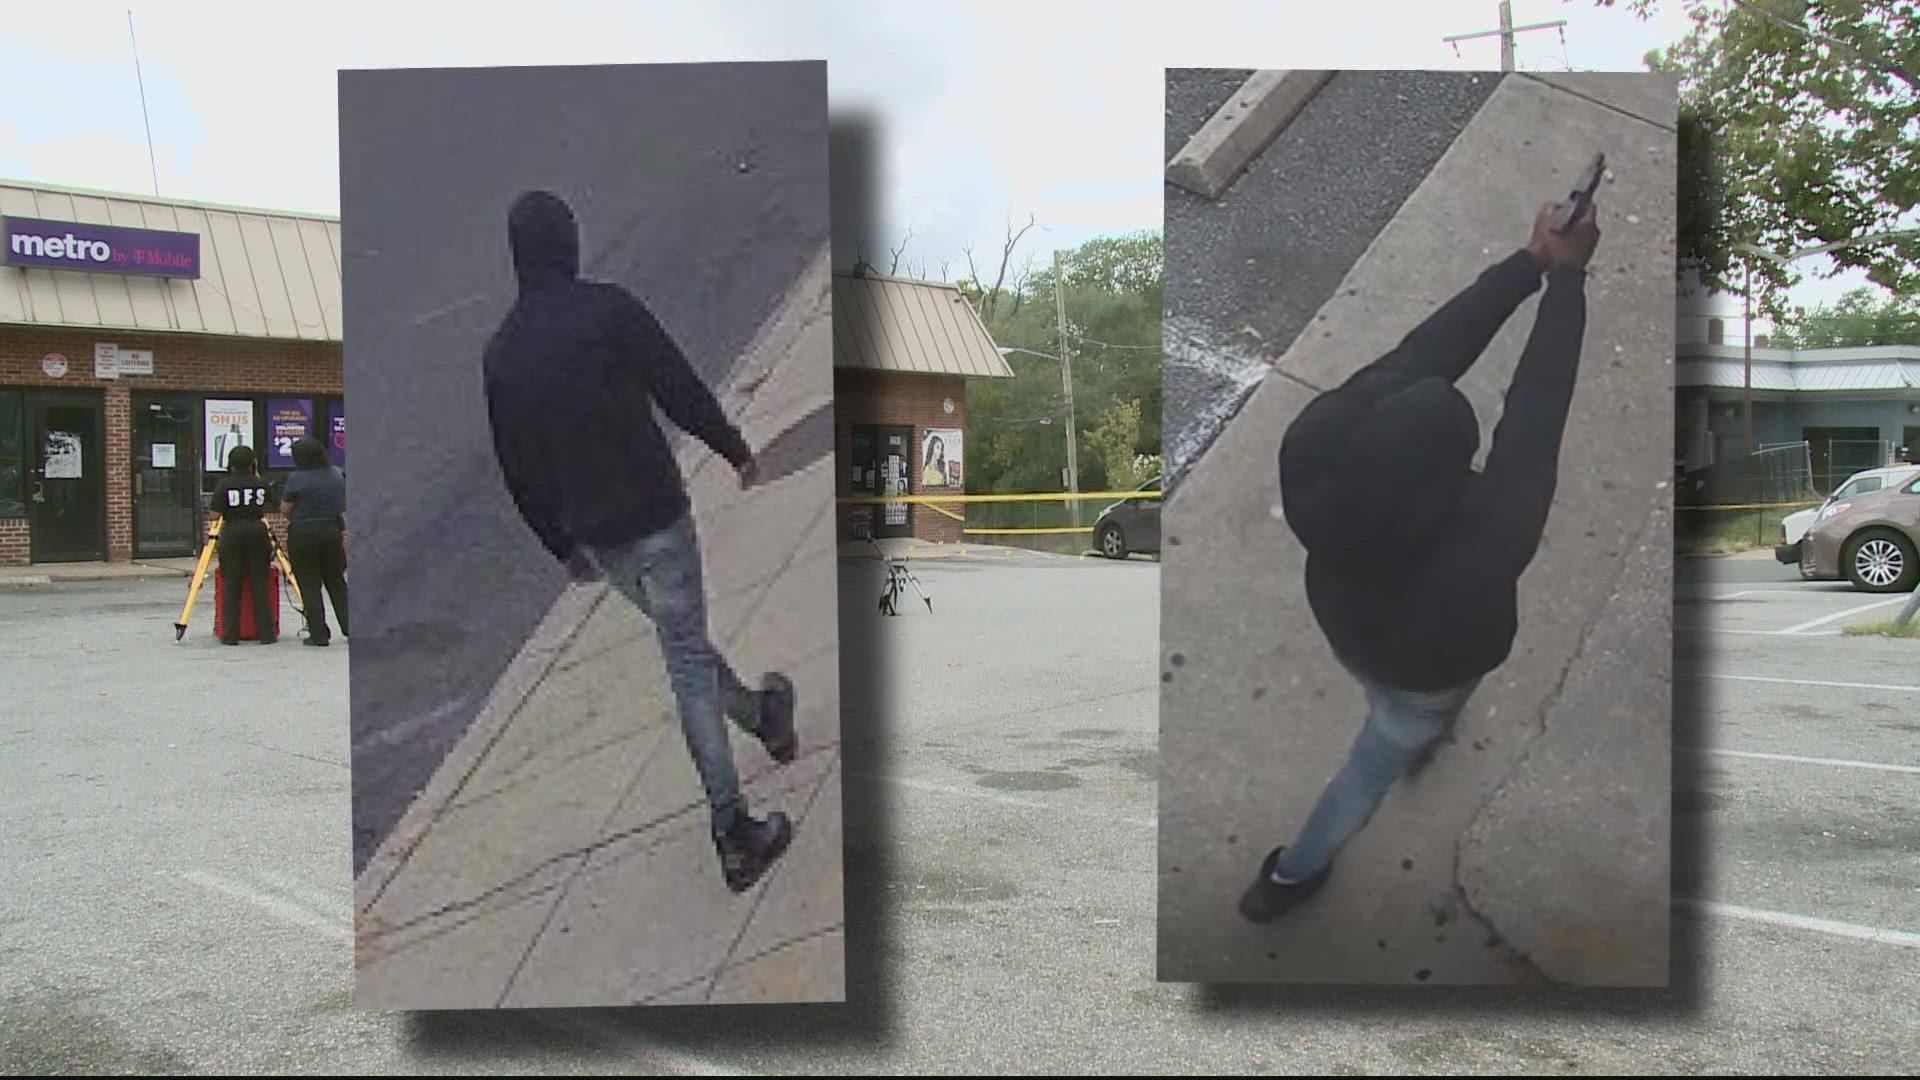 Police are on the lookout for a man in a black hoodie, wearing gray sneakers and blue jeans.